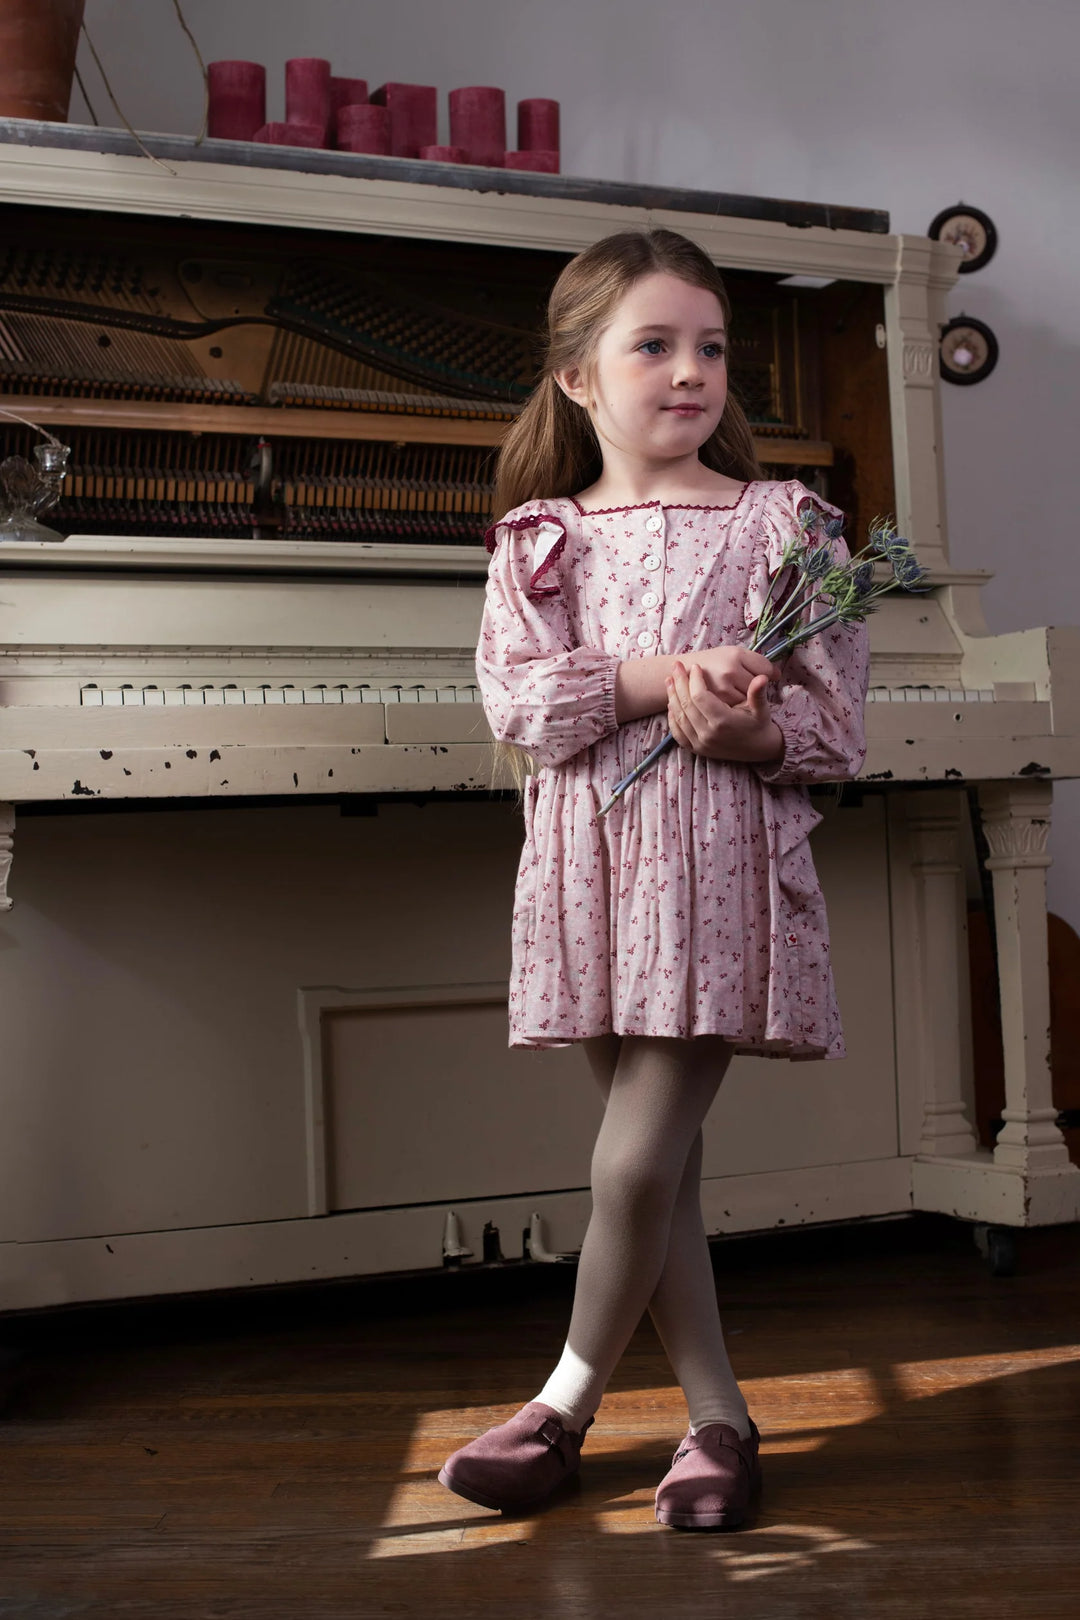 Girls Dresses & Skirts | Featuring Persnickety, Flit & Flitter & More ...